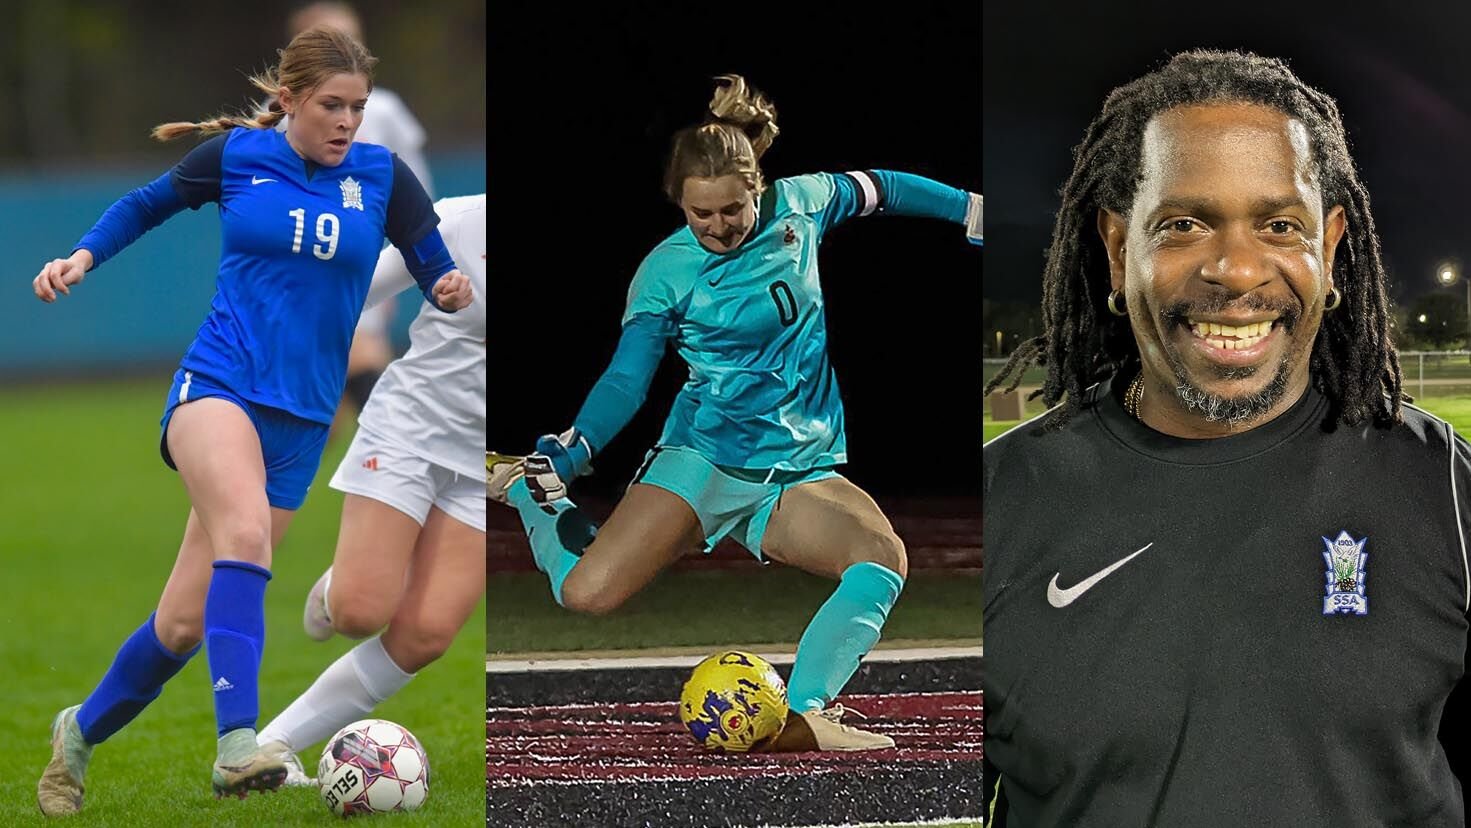 2023-24 St. Tammany Girls Soccer All-Parish Team Stars: St. Scholastica State Champs, Lainey Connell Shines